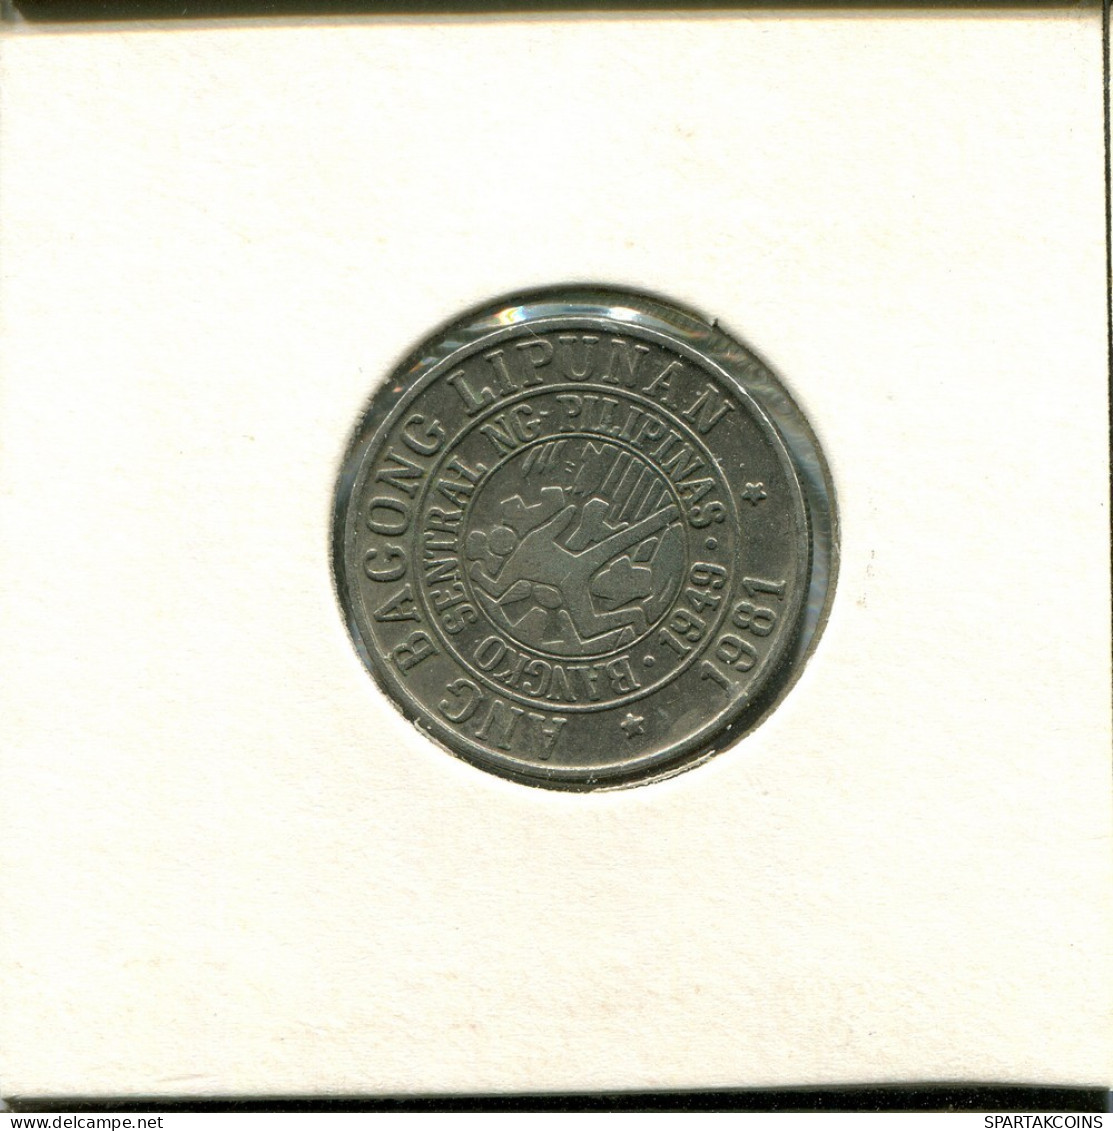 25 SENTIMOS 1981 PHILIPPINES Coin #AS716.U.A - Philippines